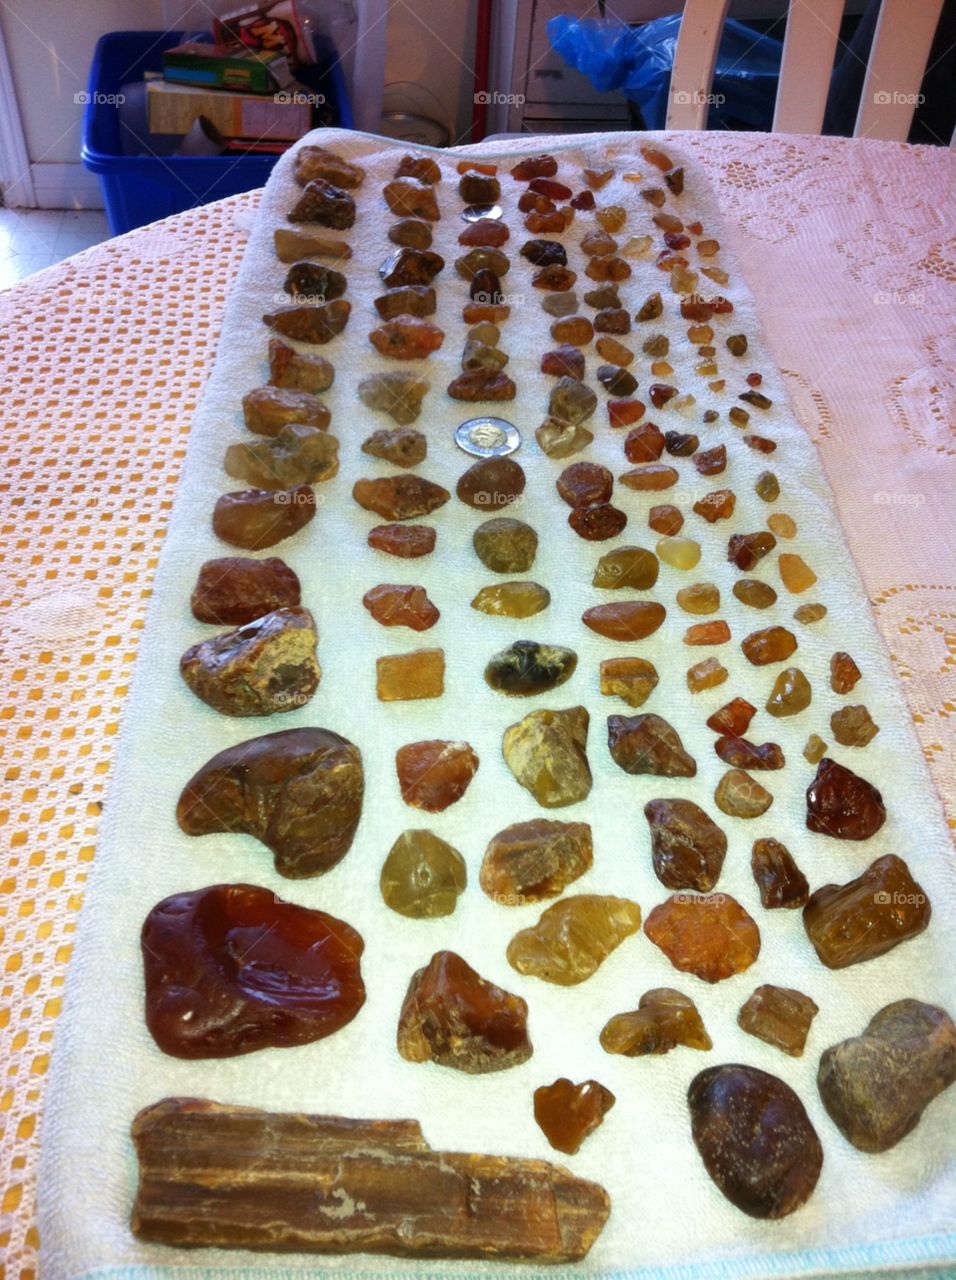 My Amber collection from 1 summer.